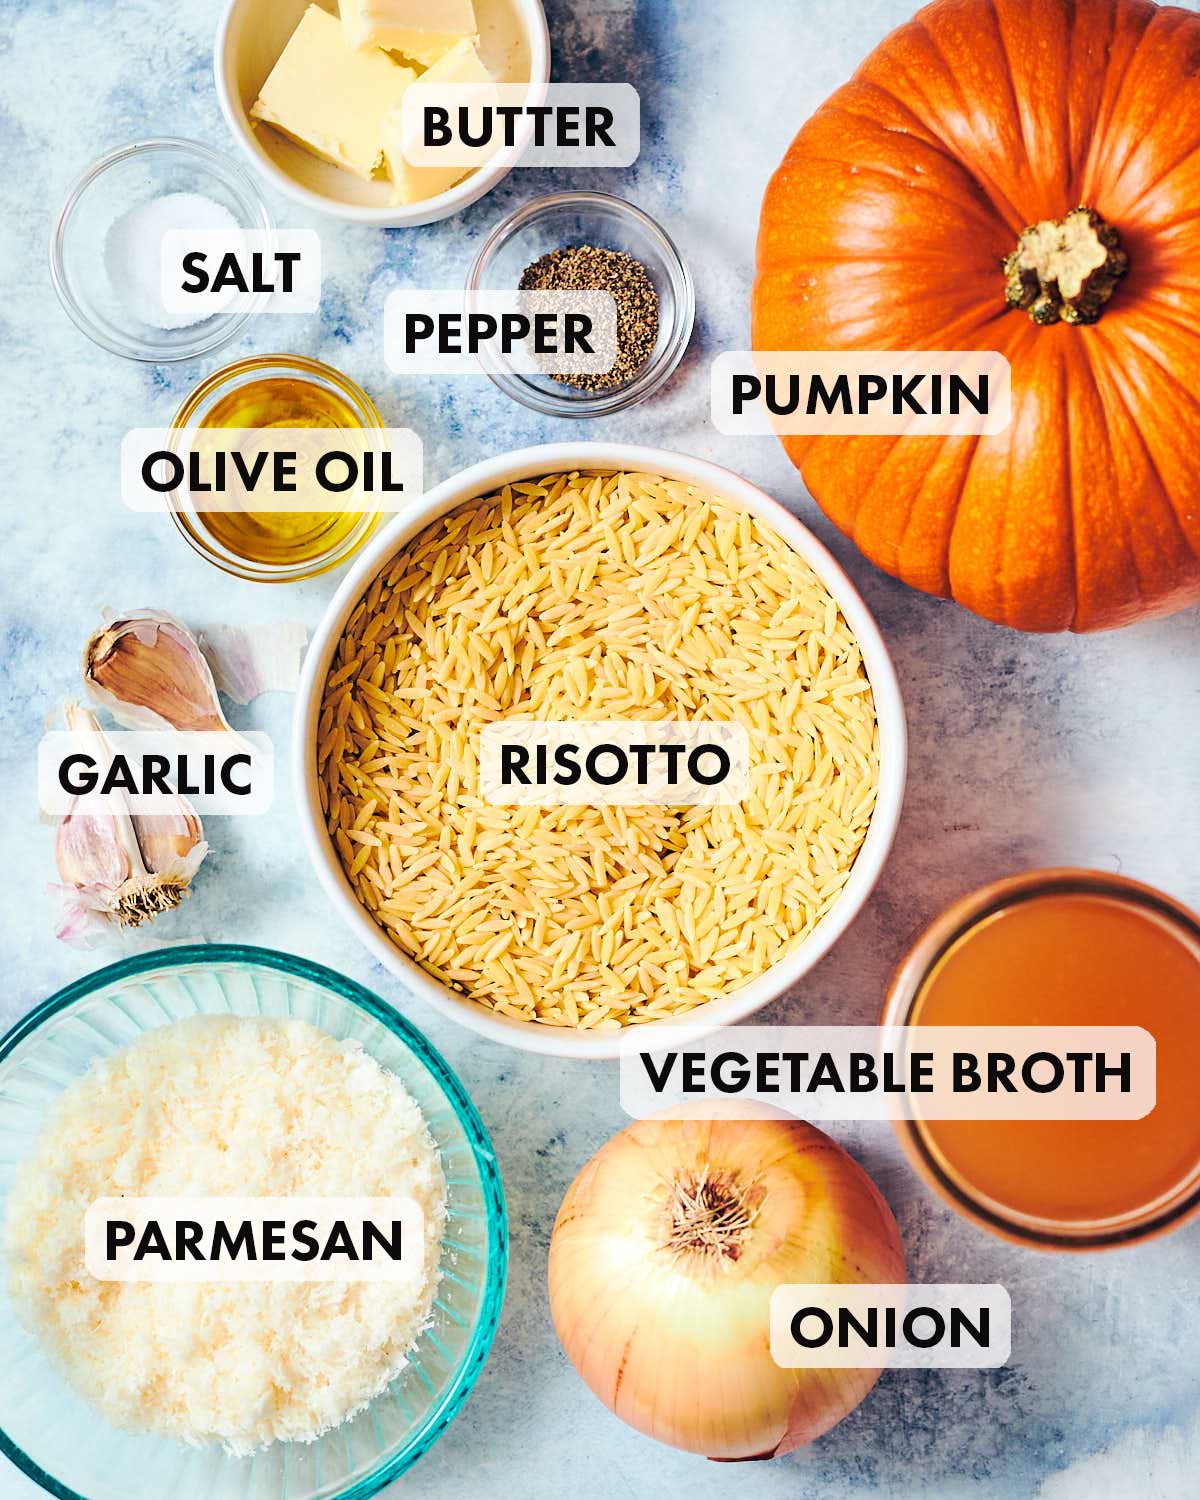 Ingredients to make Evergreen Kitchen's Peppery Pumpkin Orzo recipe.